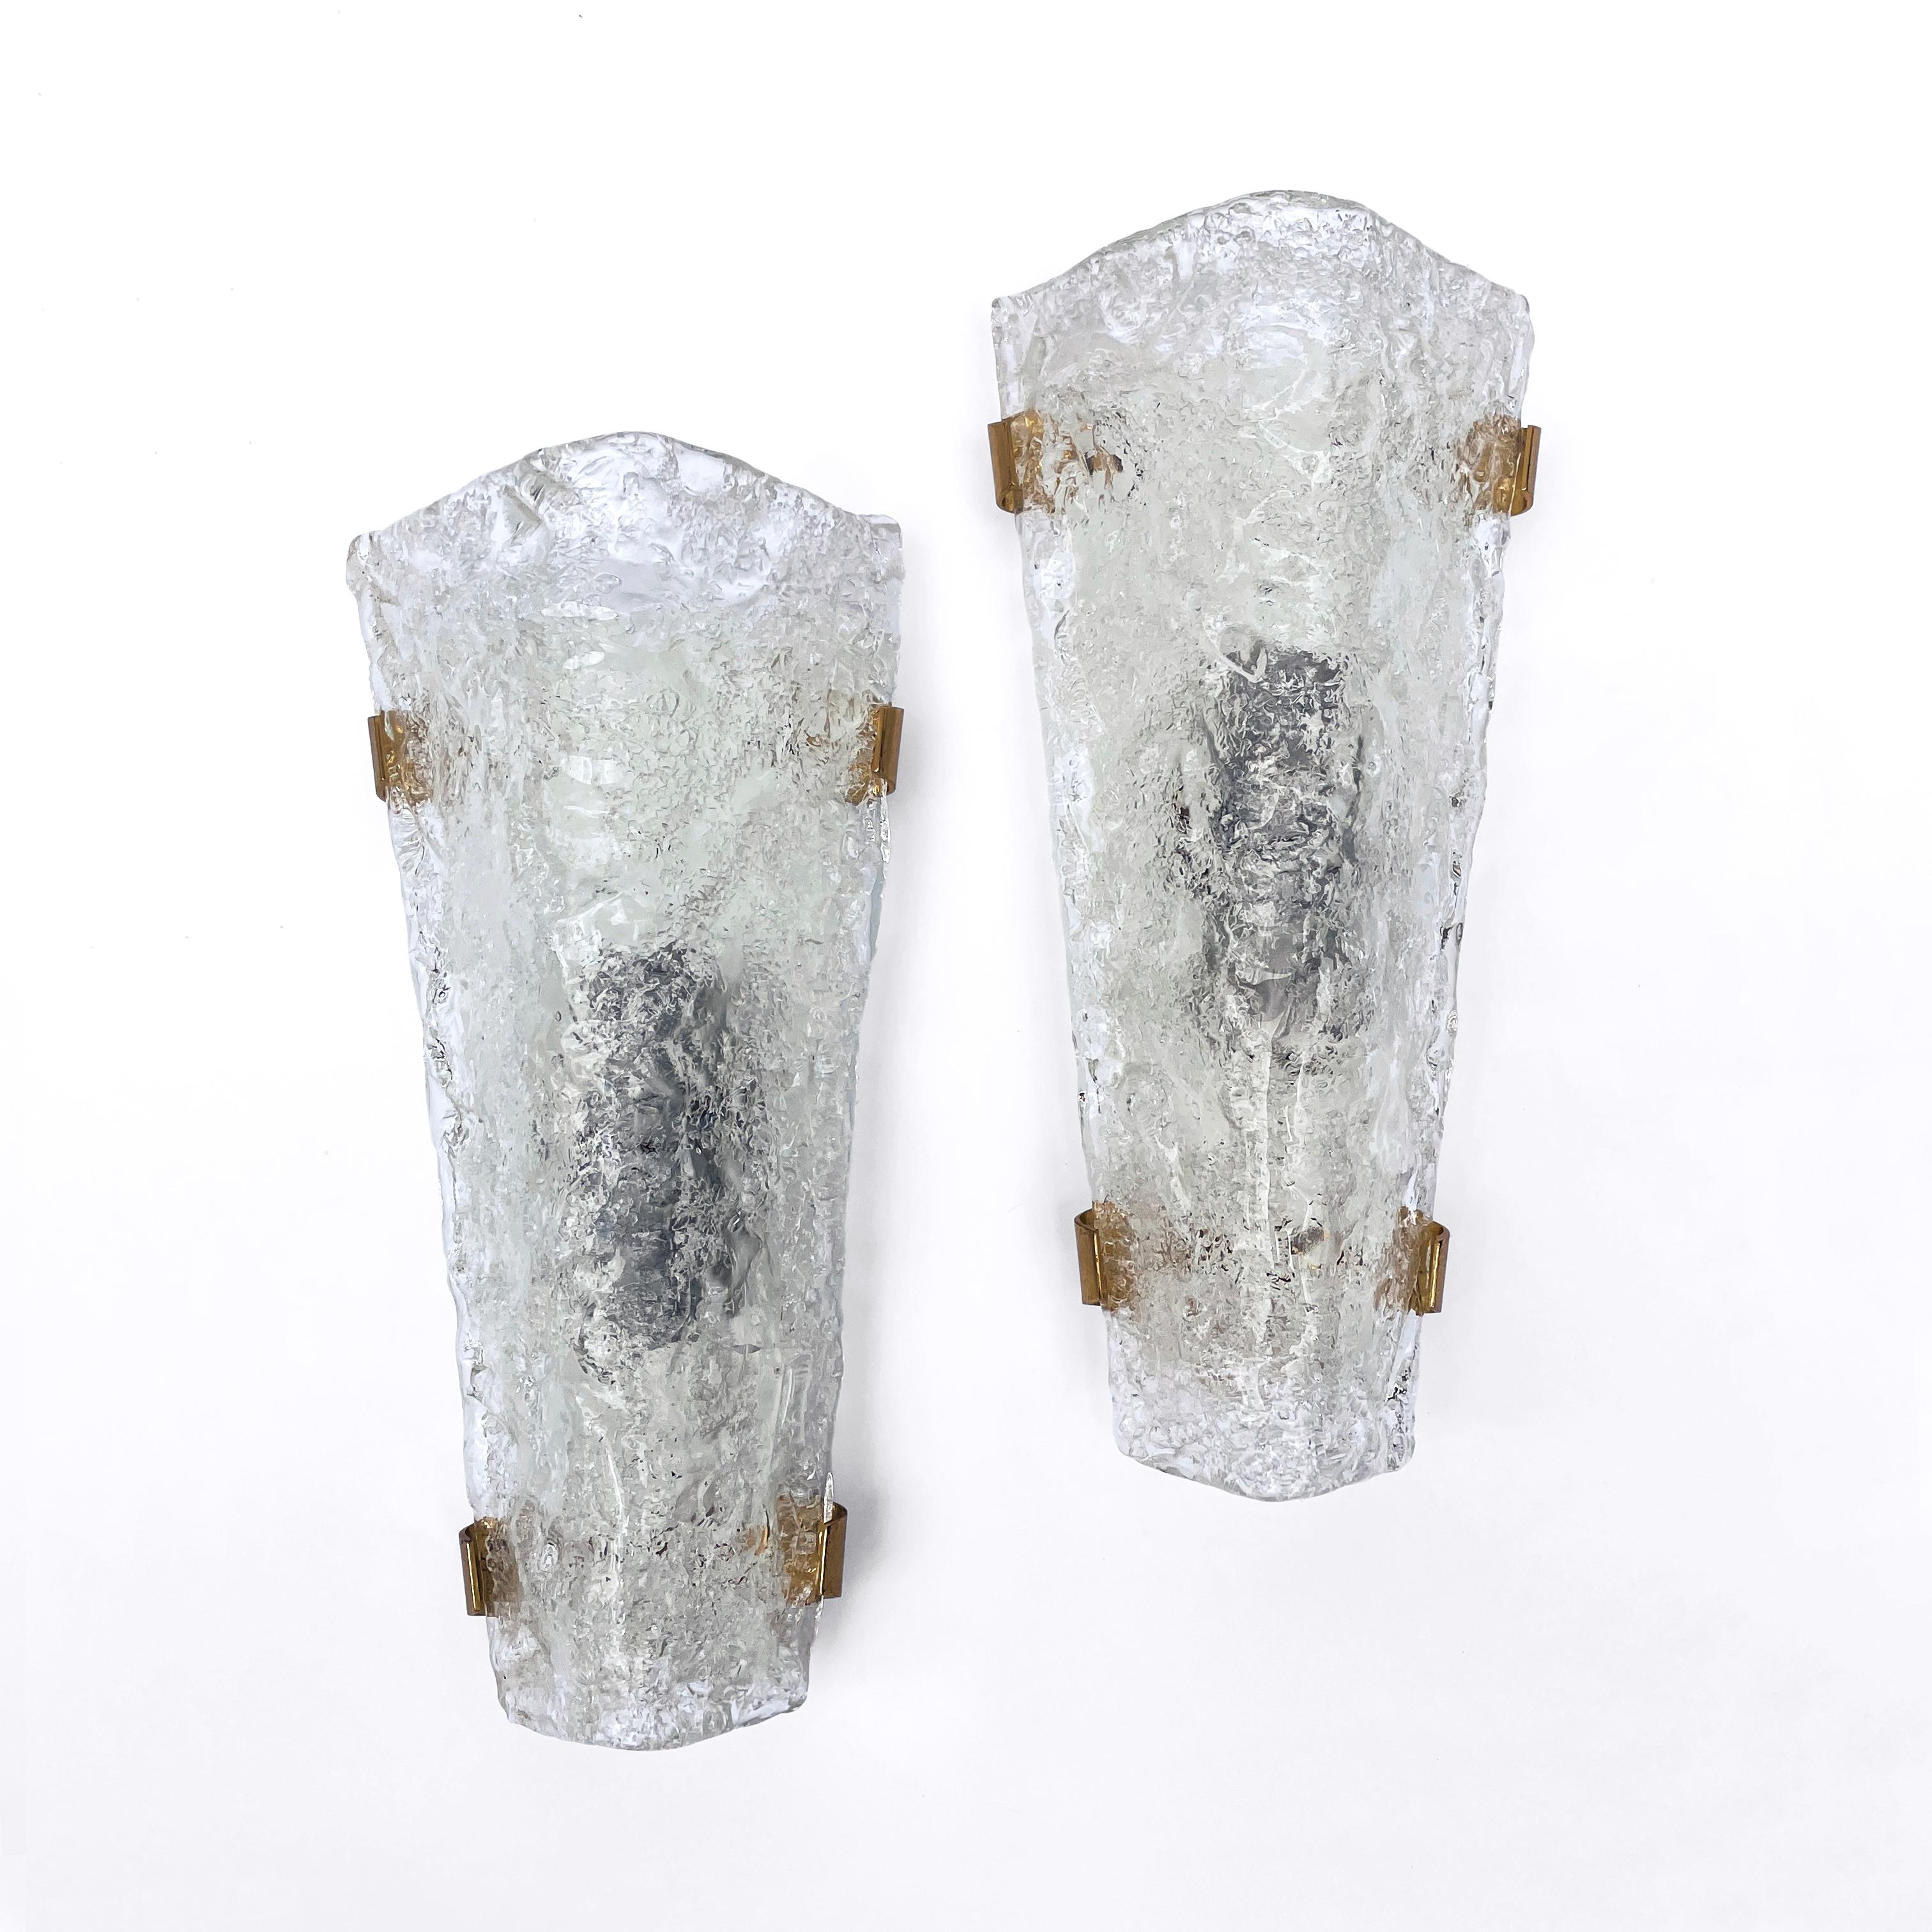 Lovely vintage mid century set of two ice glass wall lights wall sconces by Ernest Igl and manufactured by Hillebrand Leuchten in the 1960s.
The wall lights are made of thick angular glass and are each held in place with four brass fittings. The ice